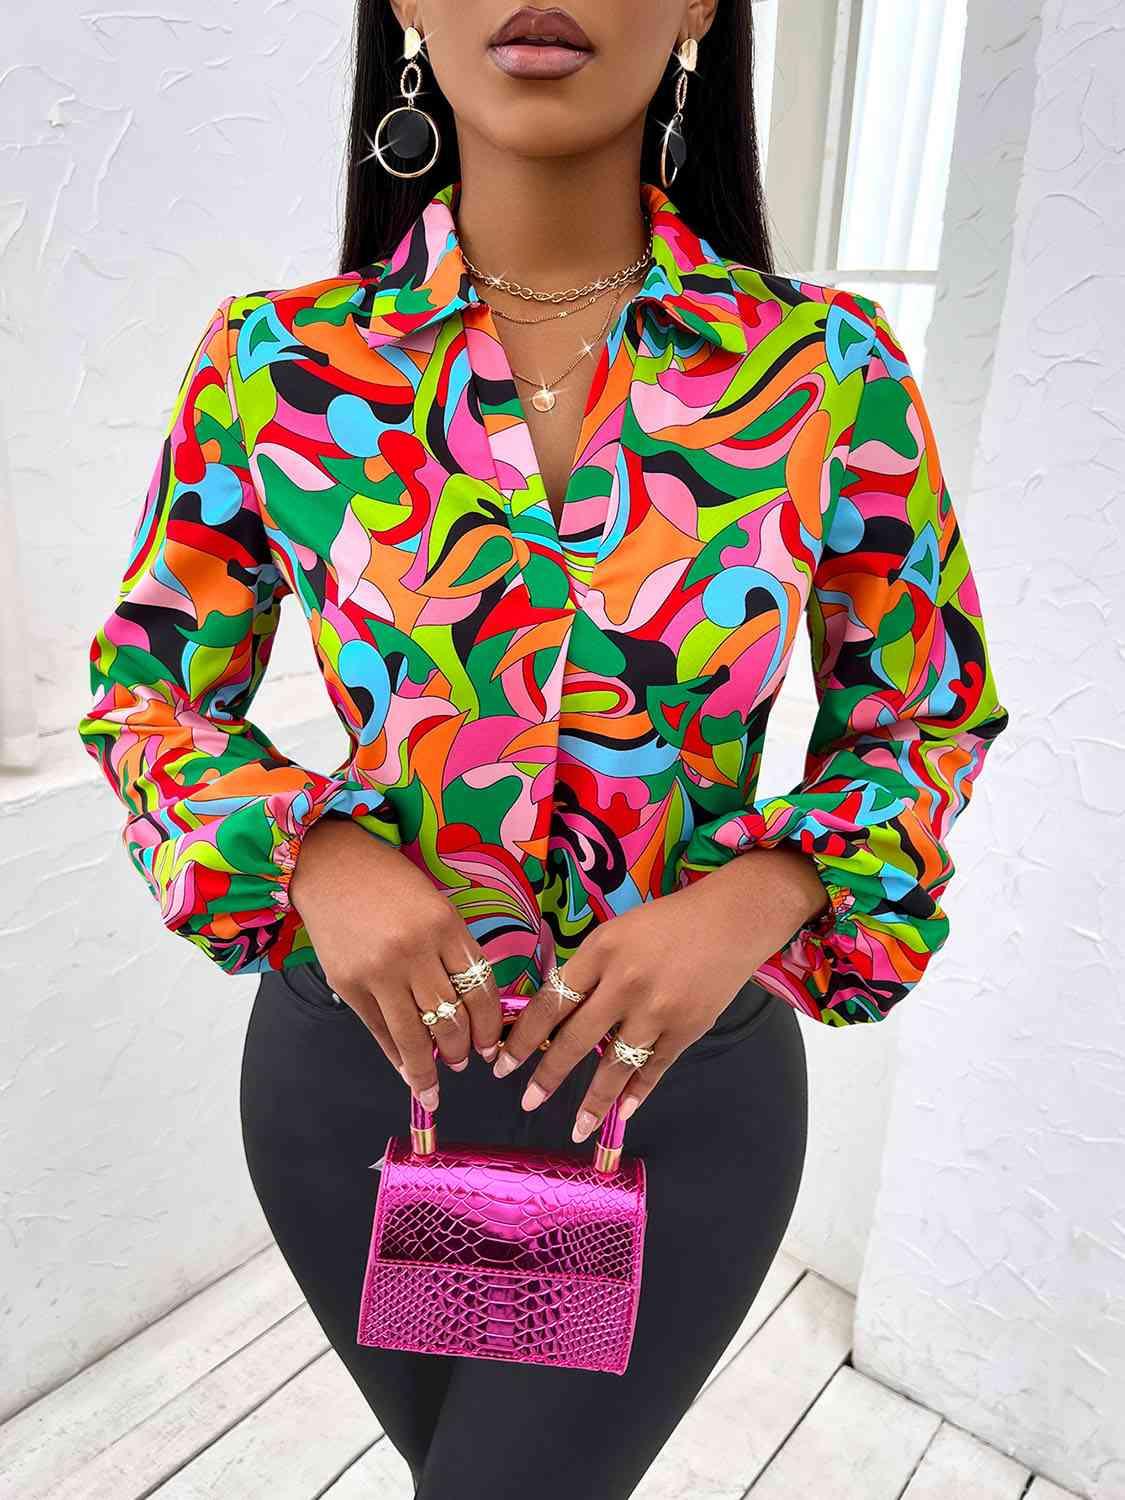 a woman in a colorful shirt holding a pink purse